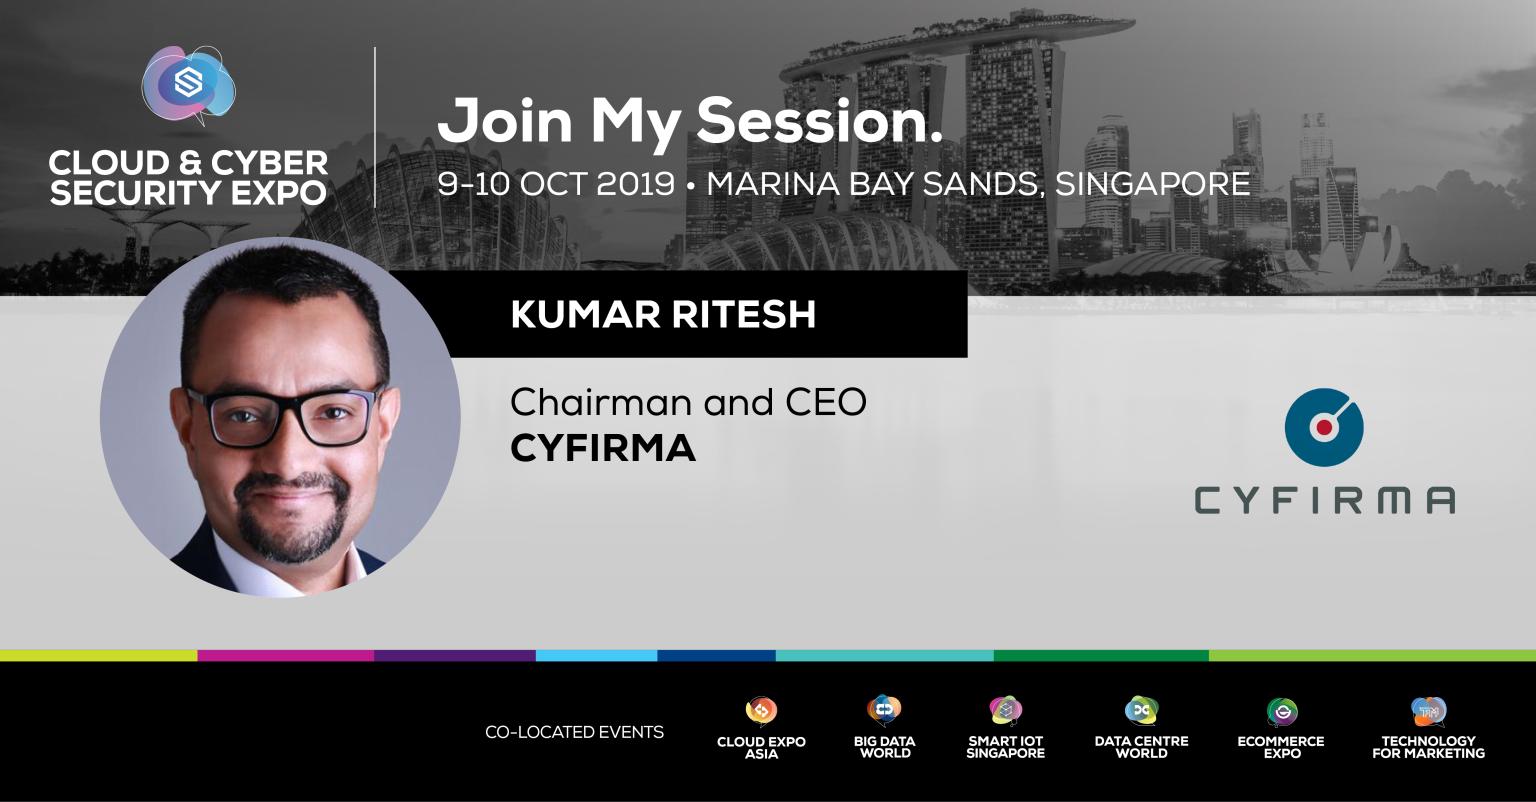 CYFIRMA is Participating at the Cloud & Cyber Security Expo 2019, Singapore